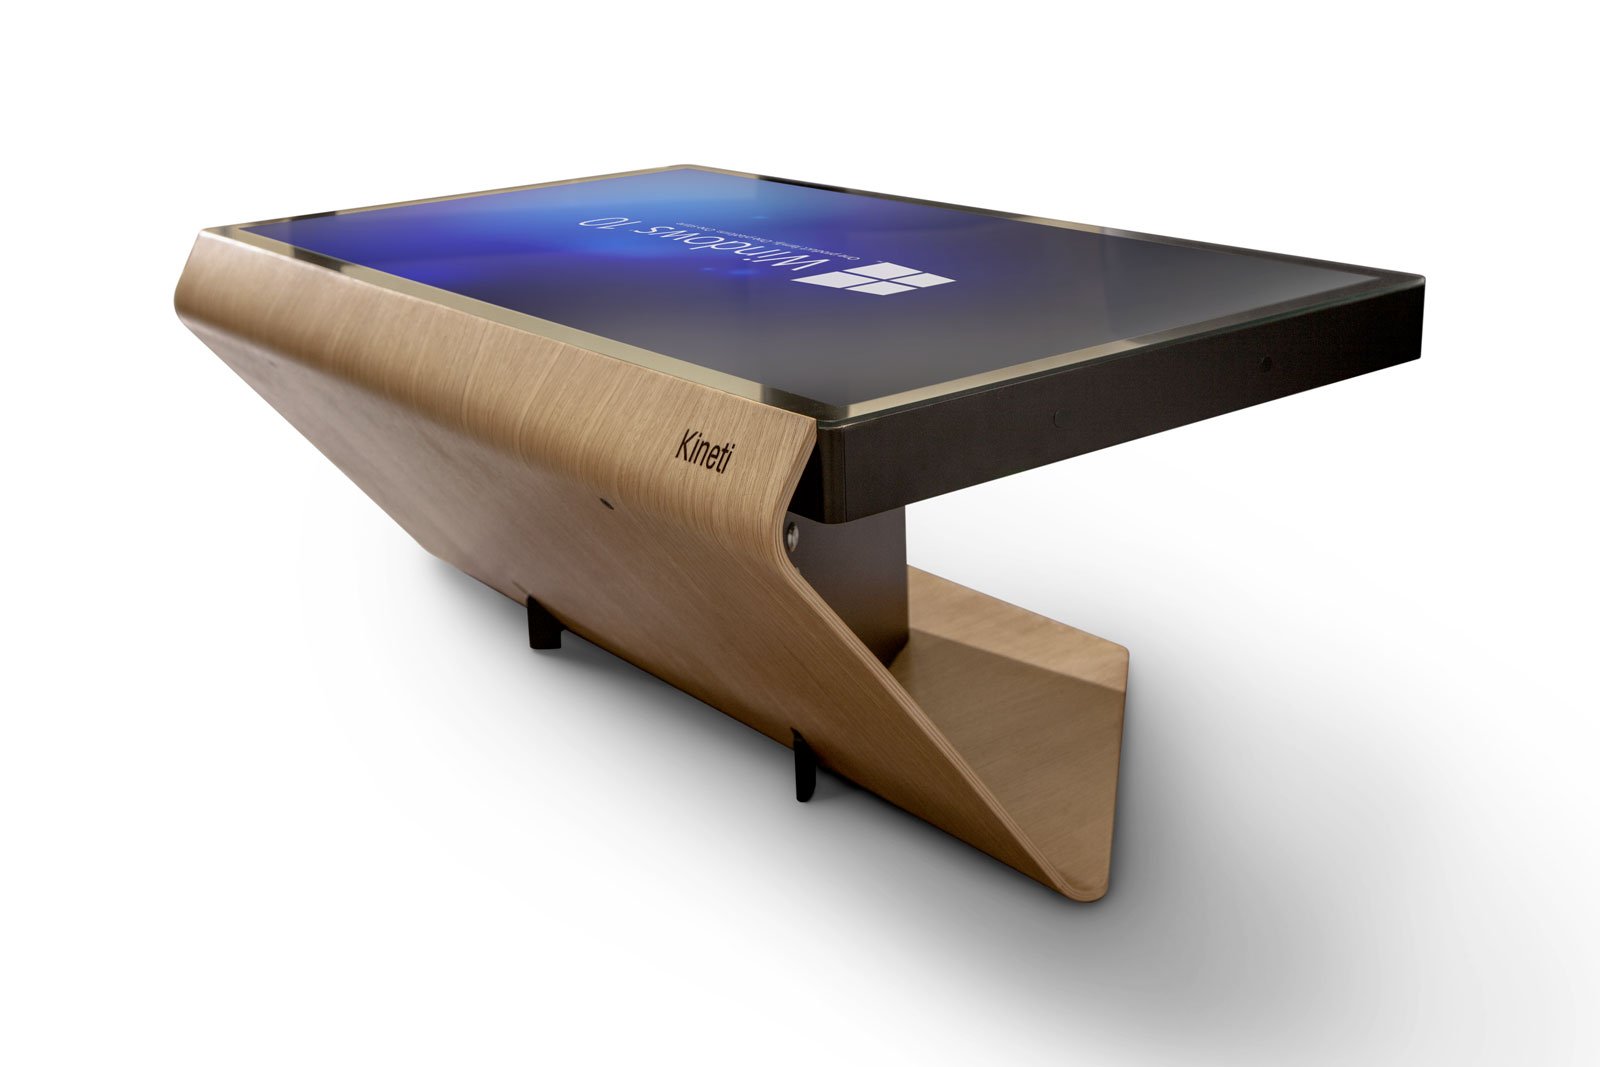 Here’s the 5000 Euro Windows 10 coffee table you have been waiting for